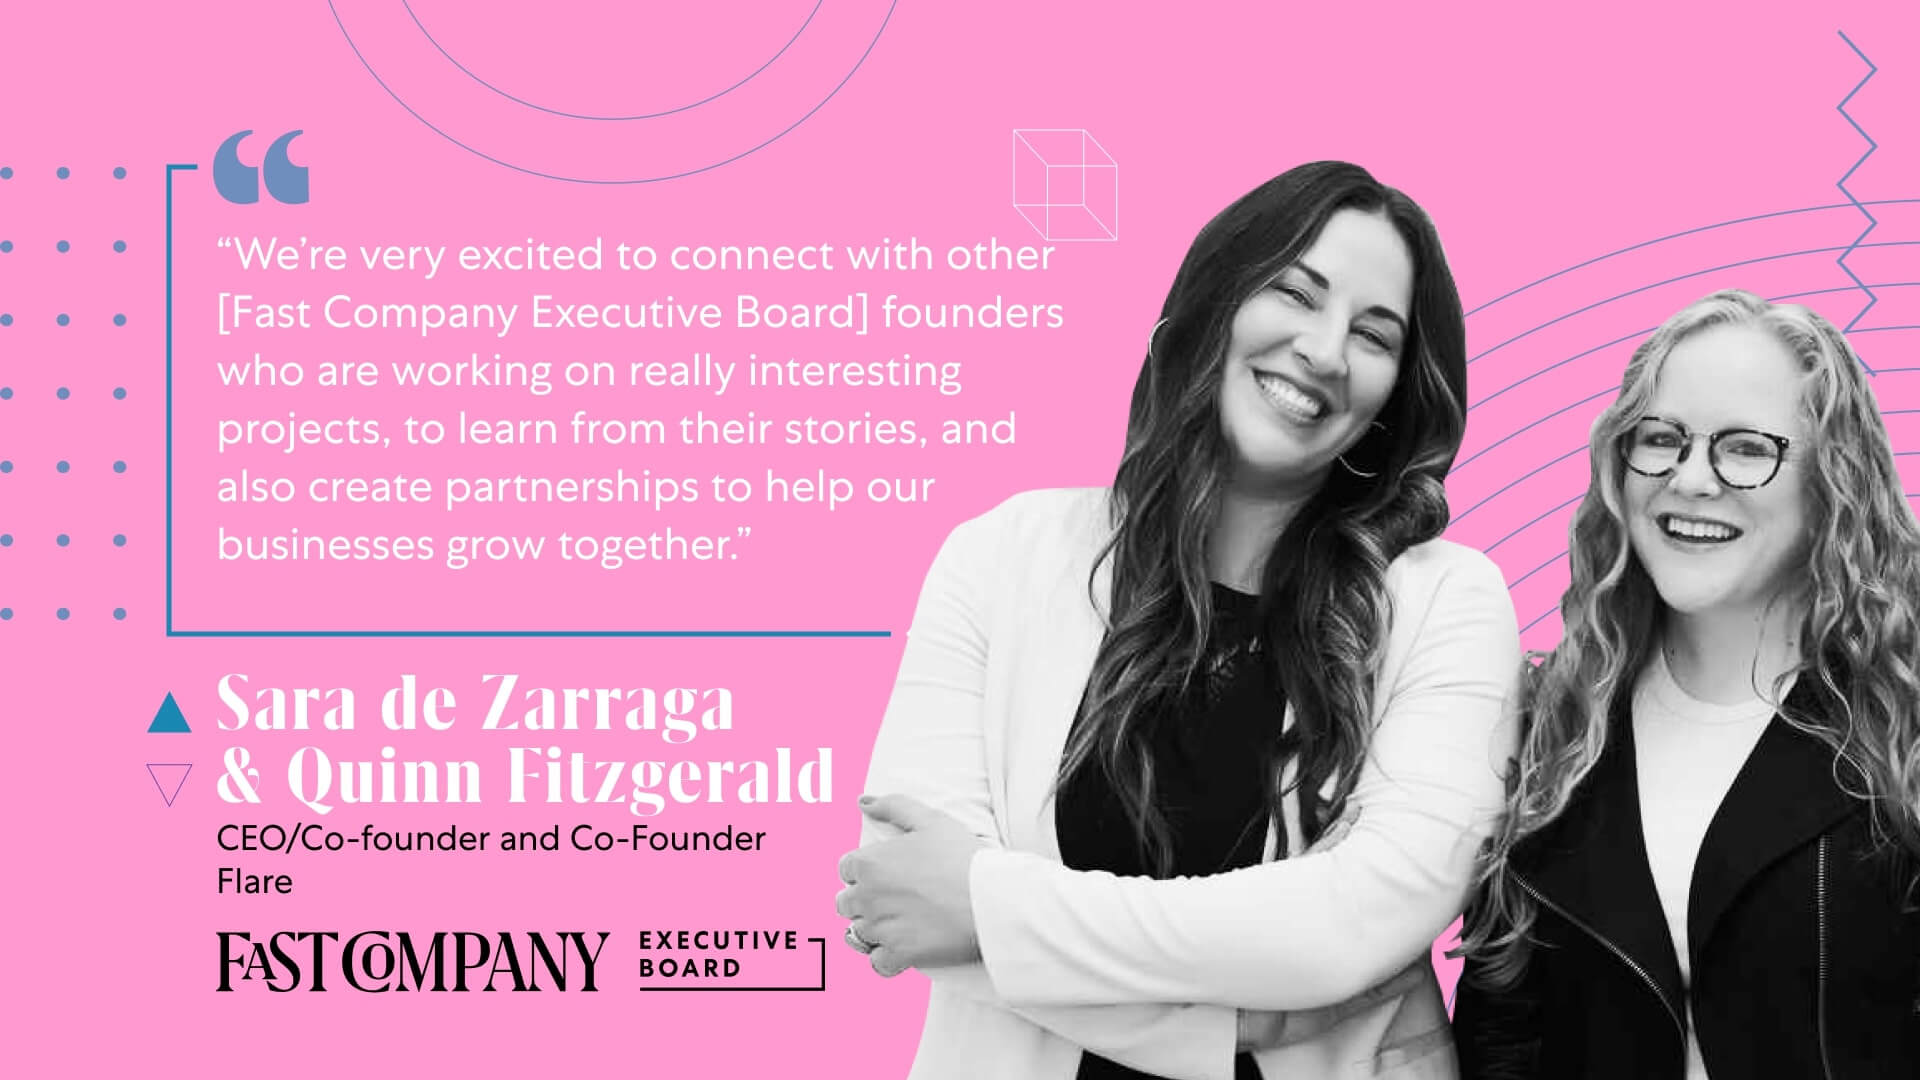 Connecting With Founders Entices Quinn Fitzgerald and Sara de Zarraga